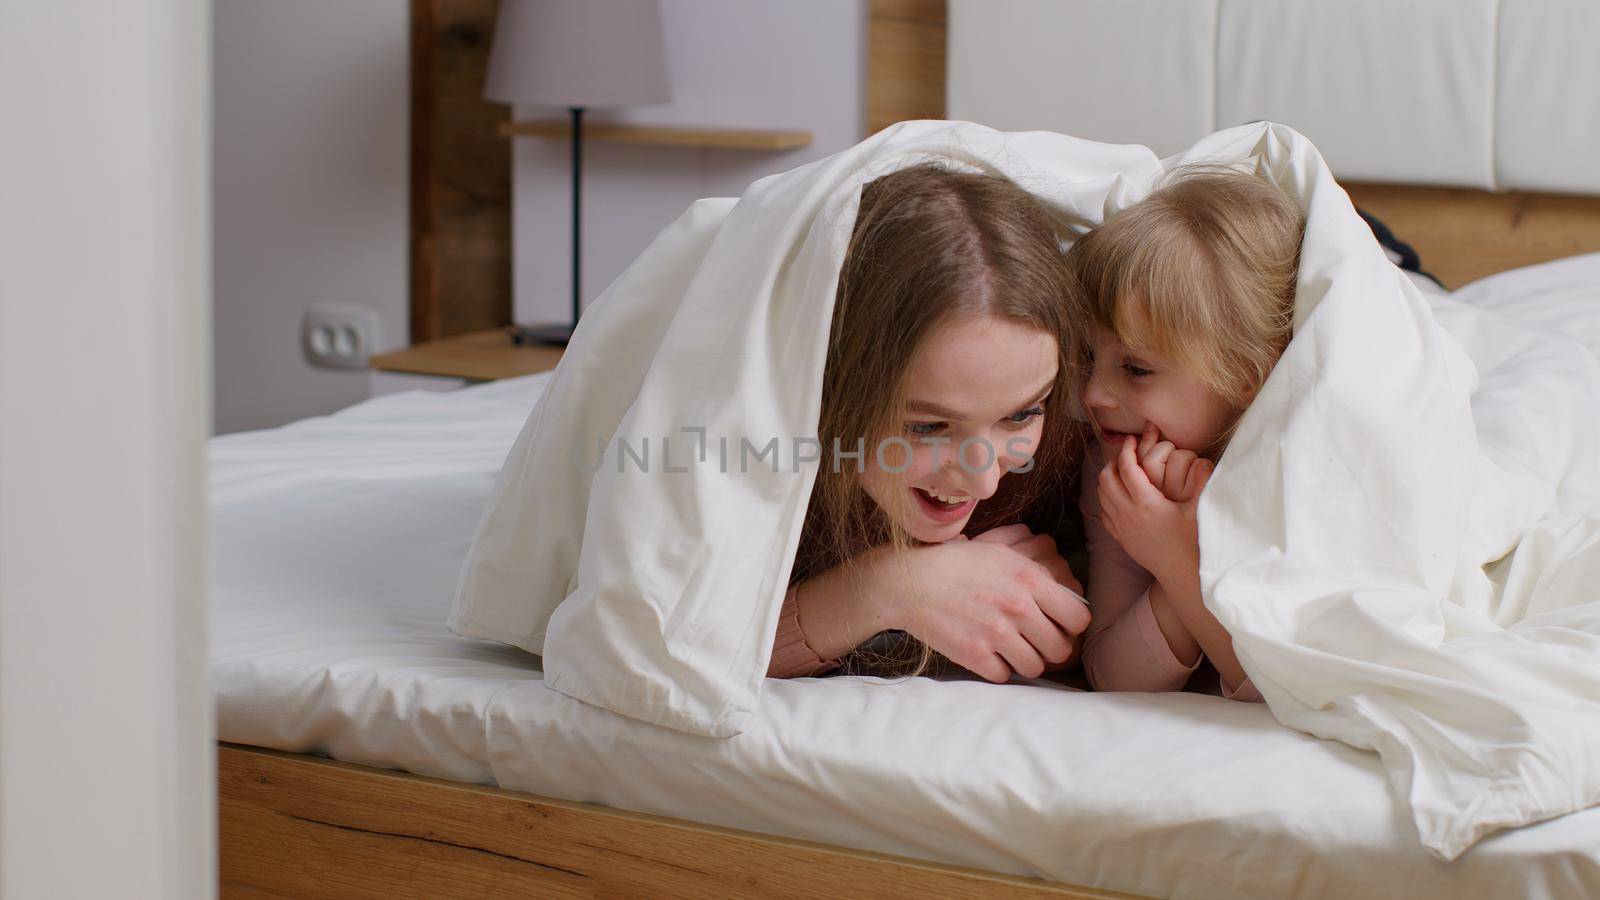 Happy family of mother with daughter girl lying on bed under duvet blanket, telling secrets to each other, having good time, smilling in bedroom. Parent and kid leisure hobbies activities together